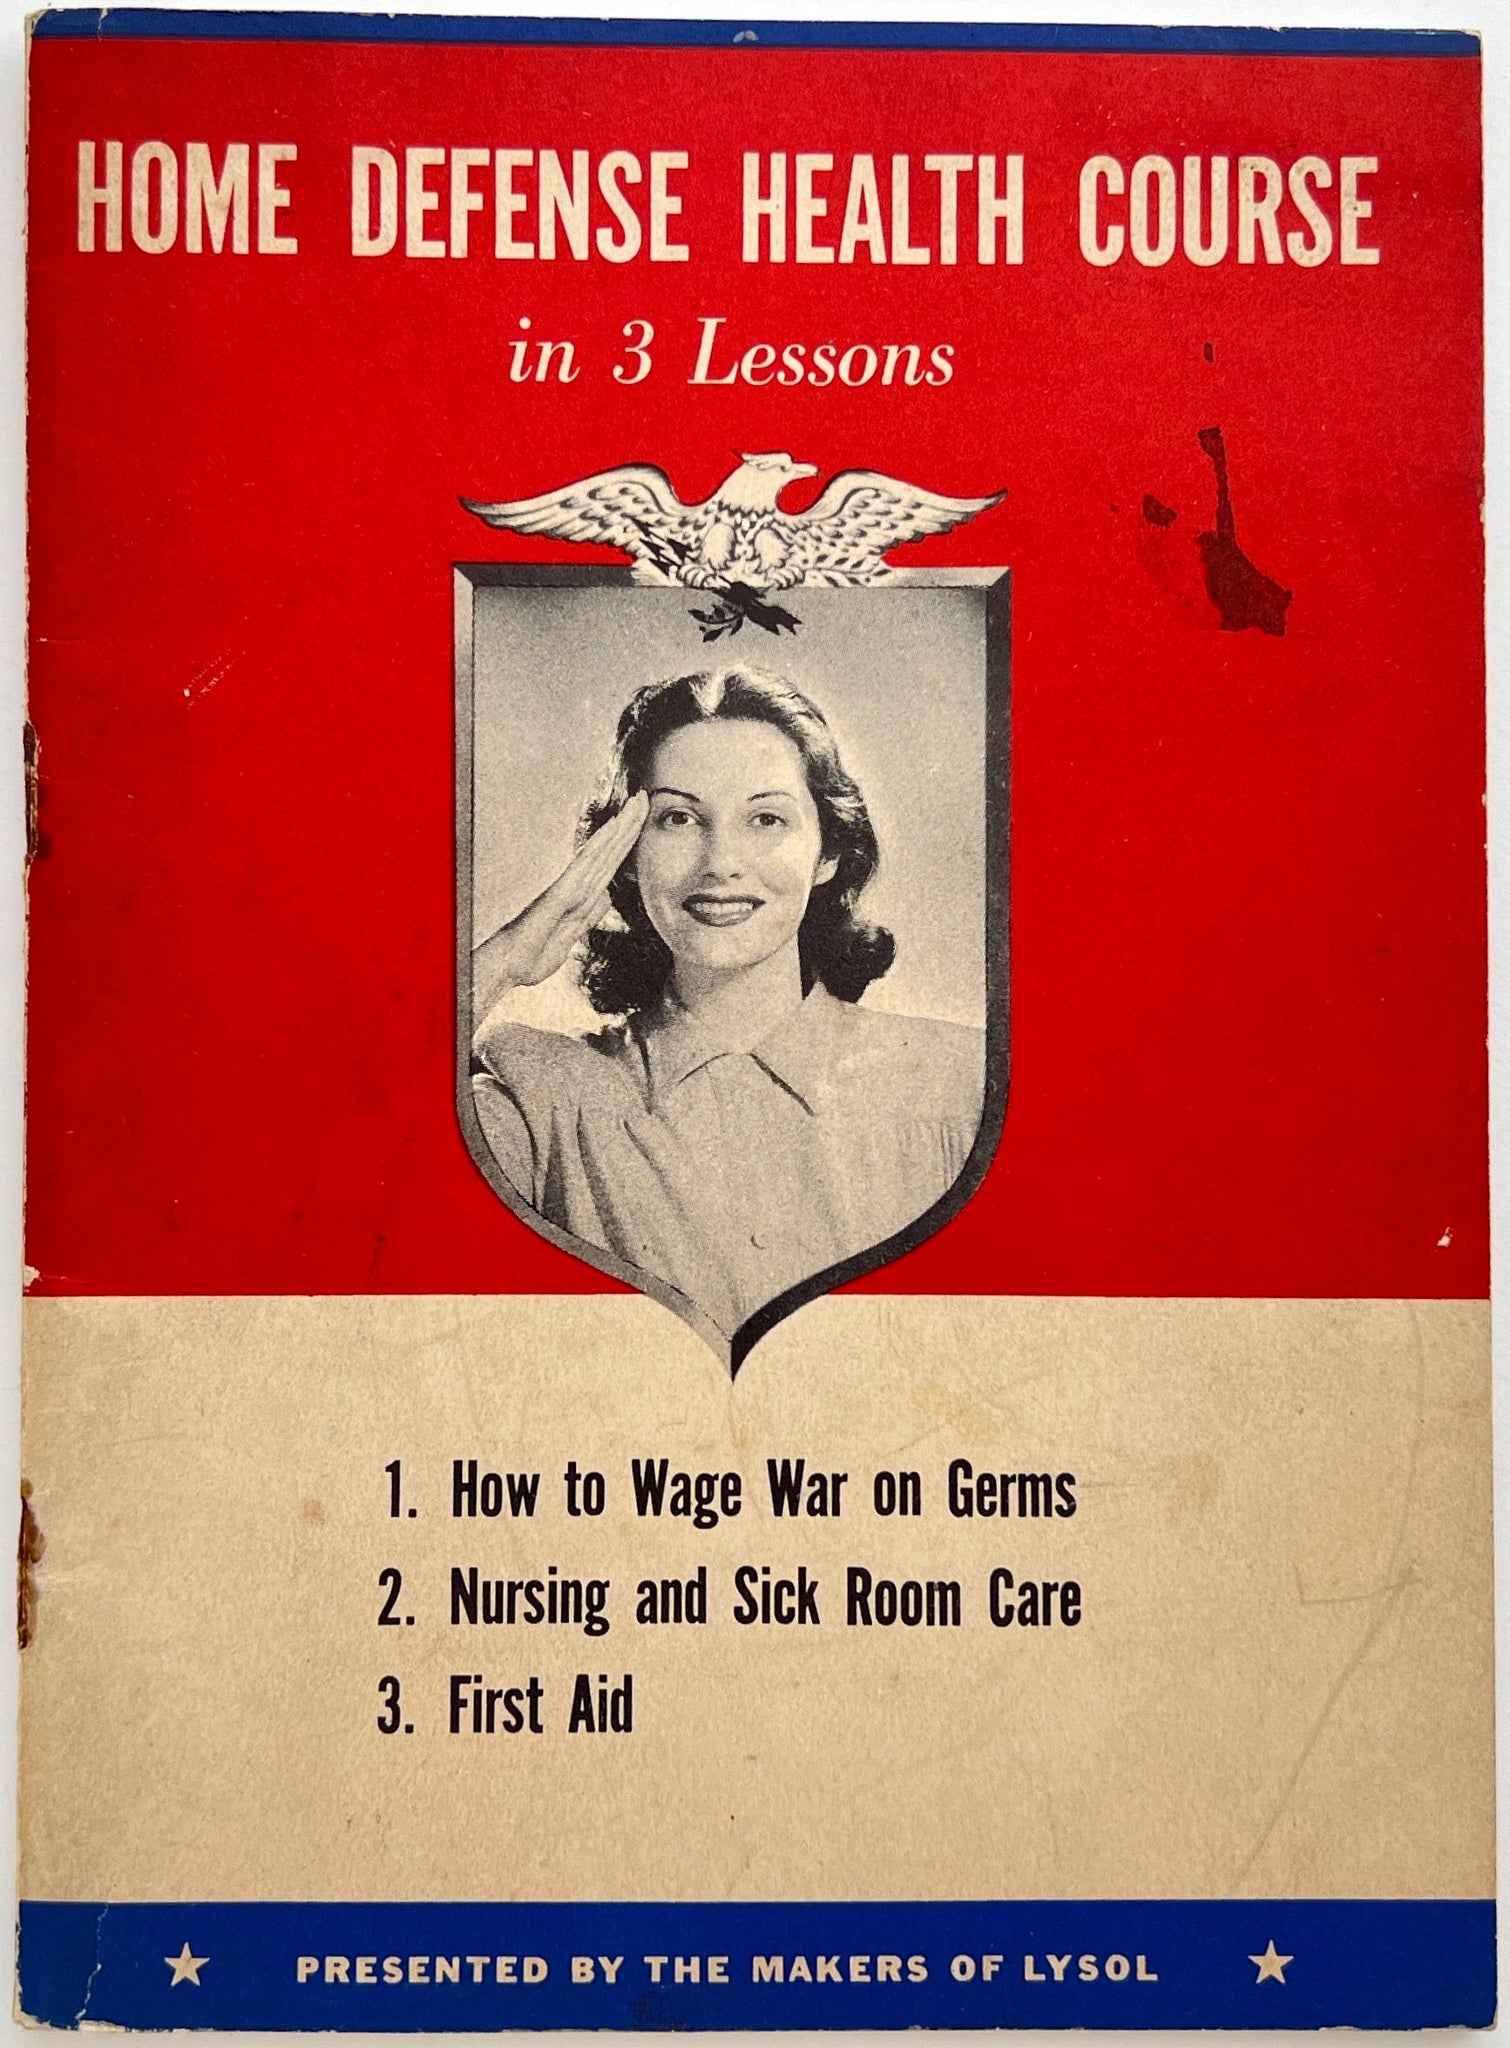 Home Defense Health Course in 3 Lessons (from the Makers of Lysol)